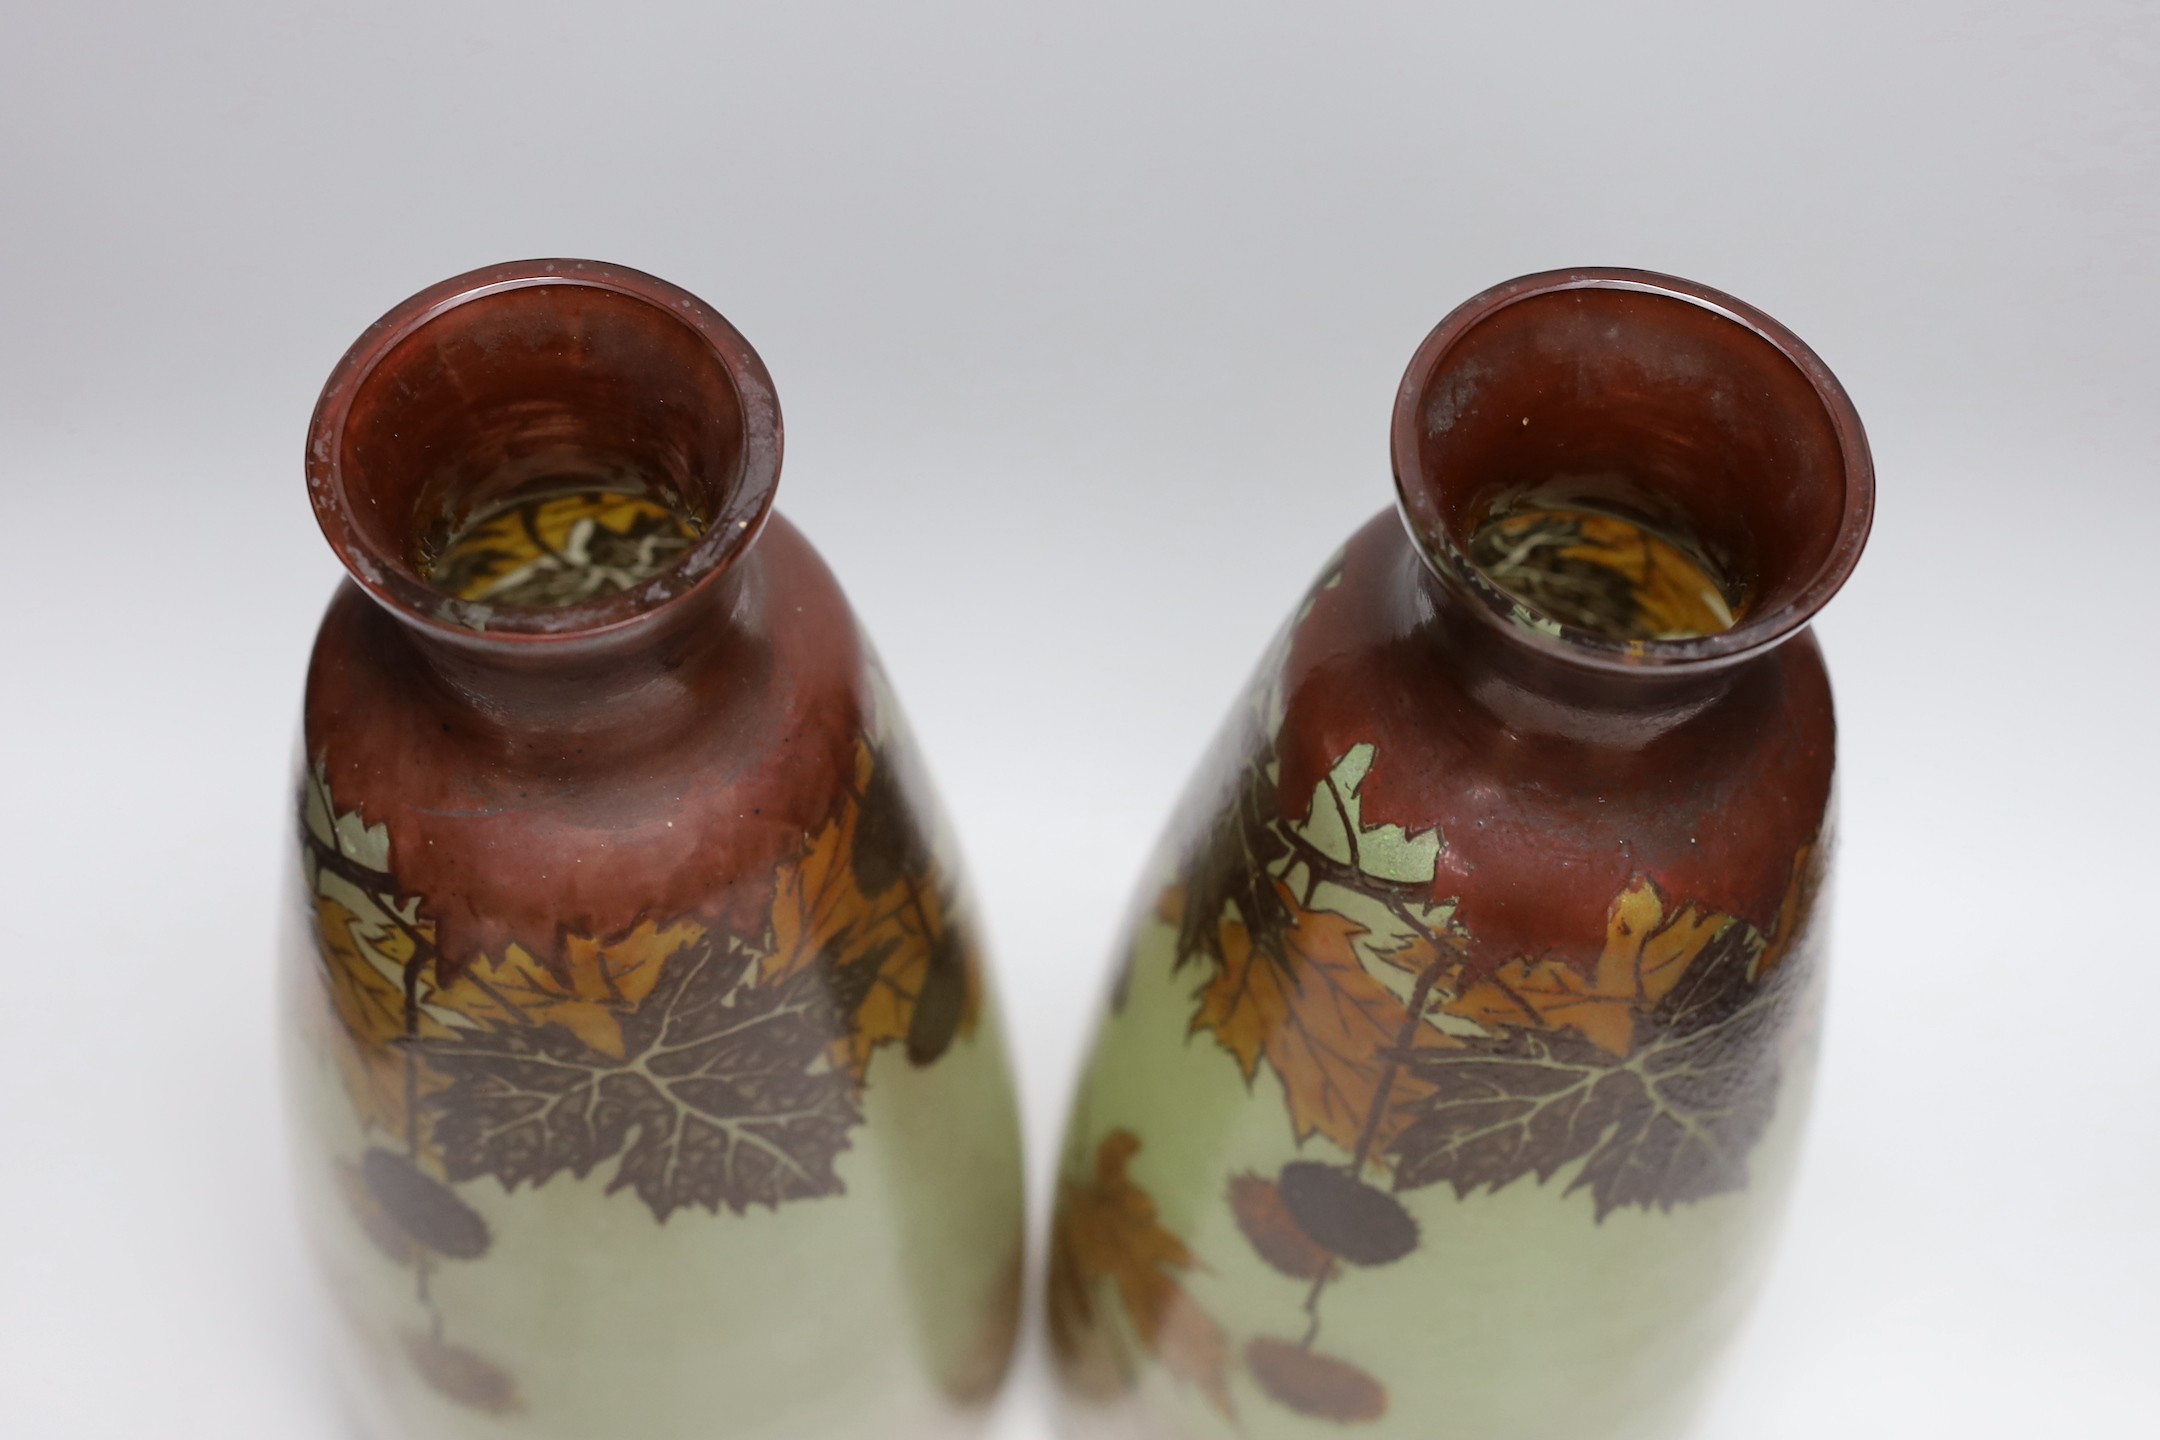 A large pair of French glass enamelled vases with autumnal design. 42cm tall